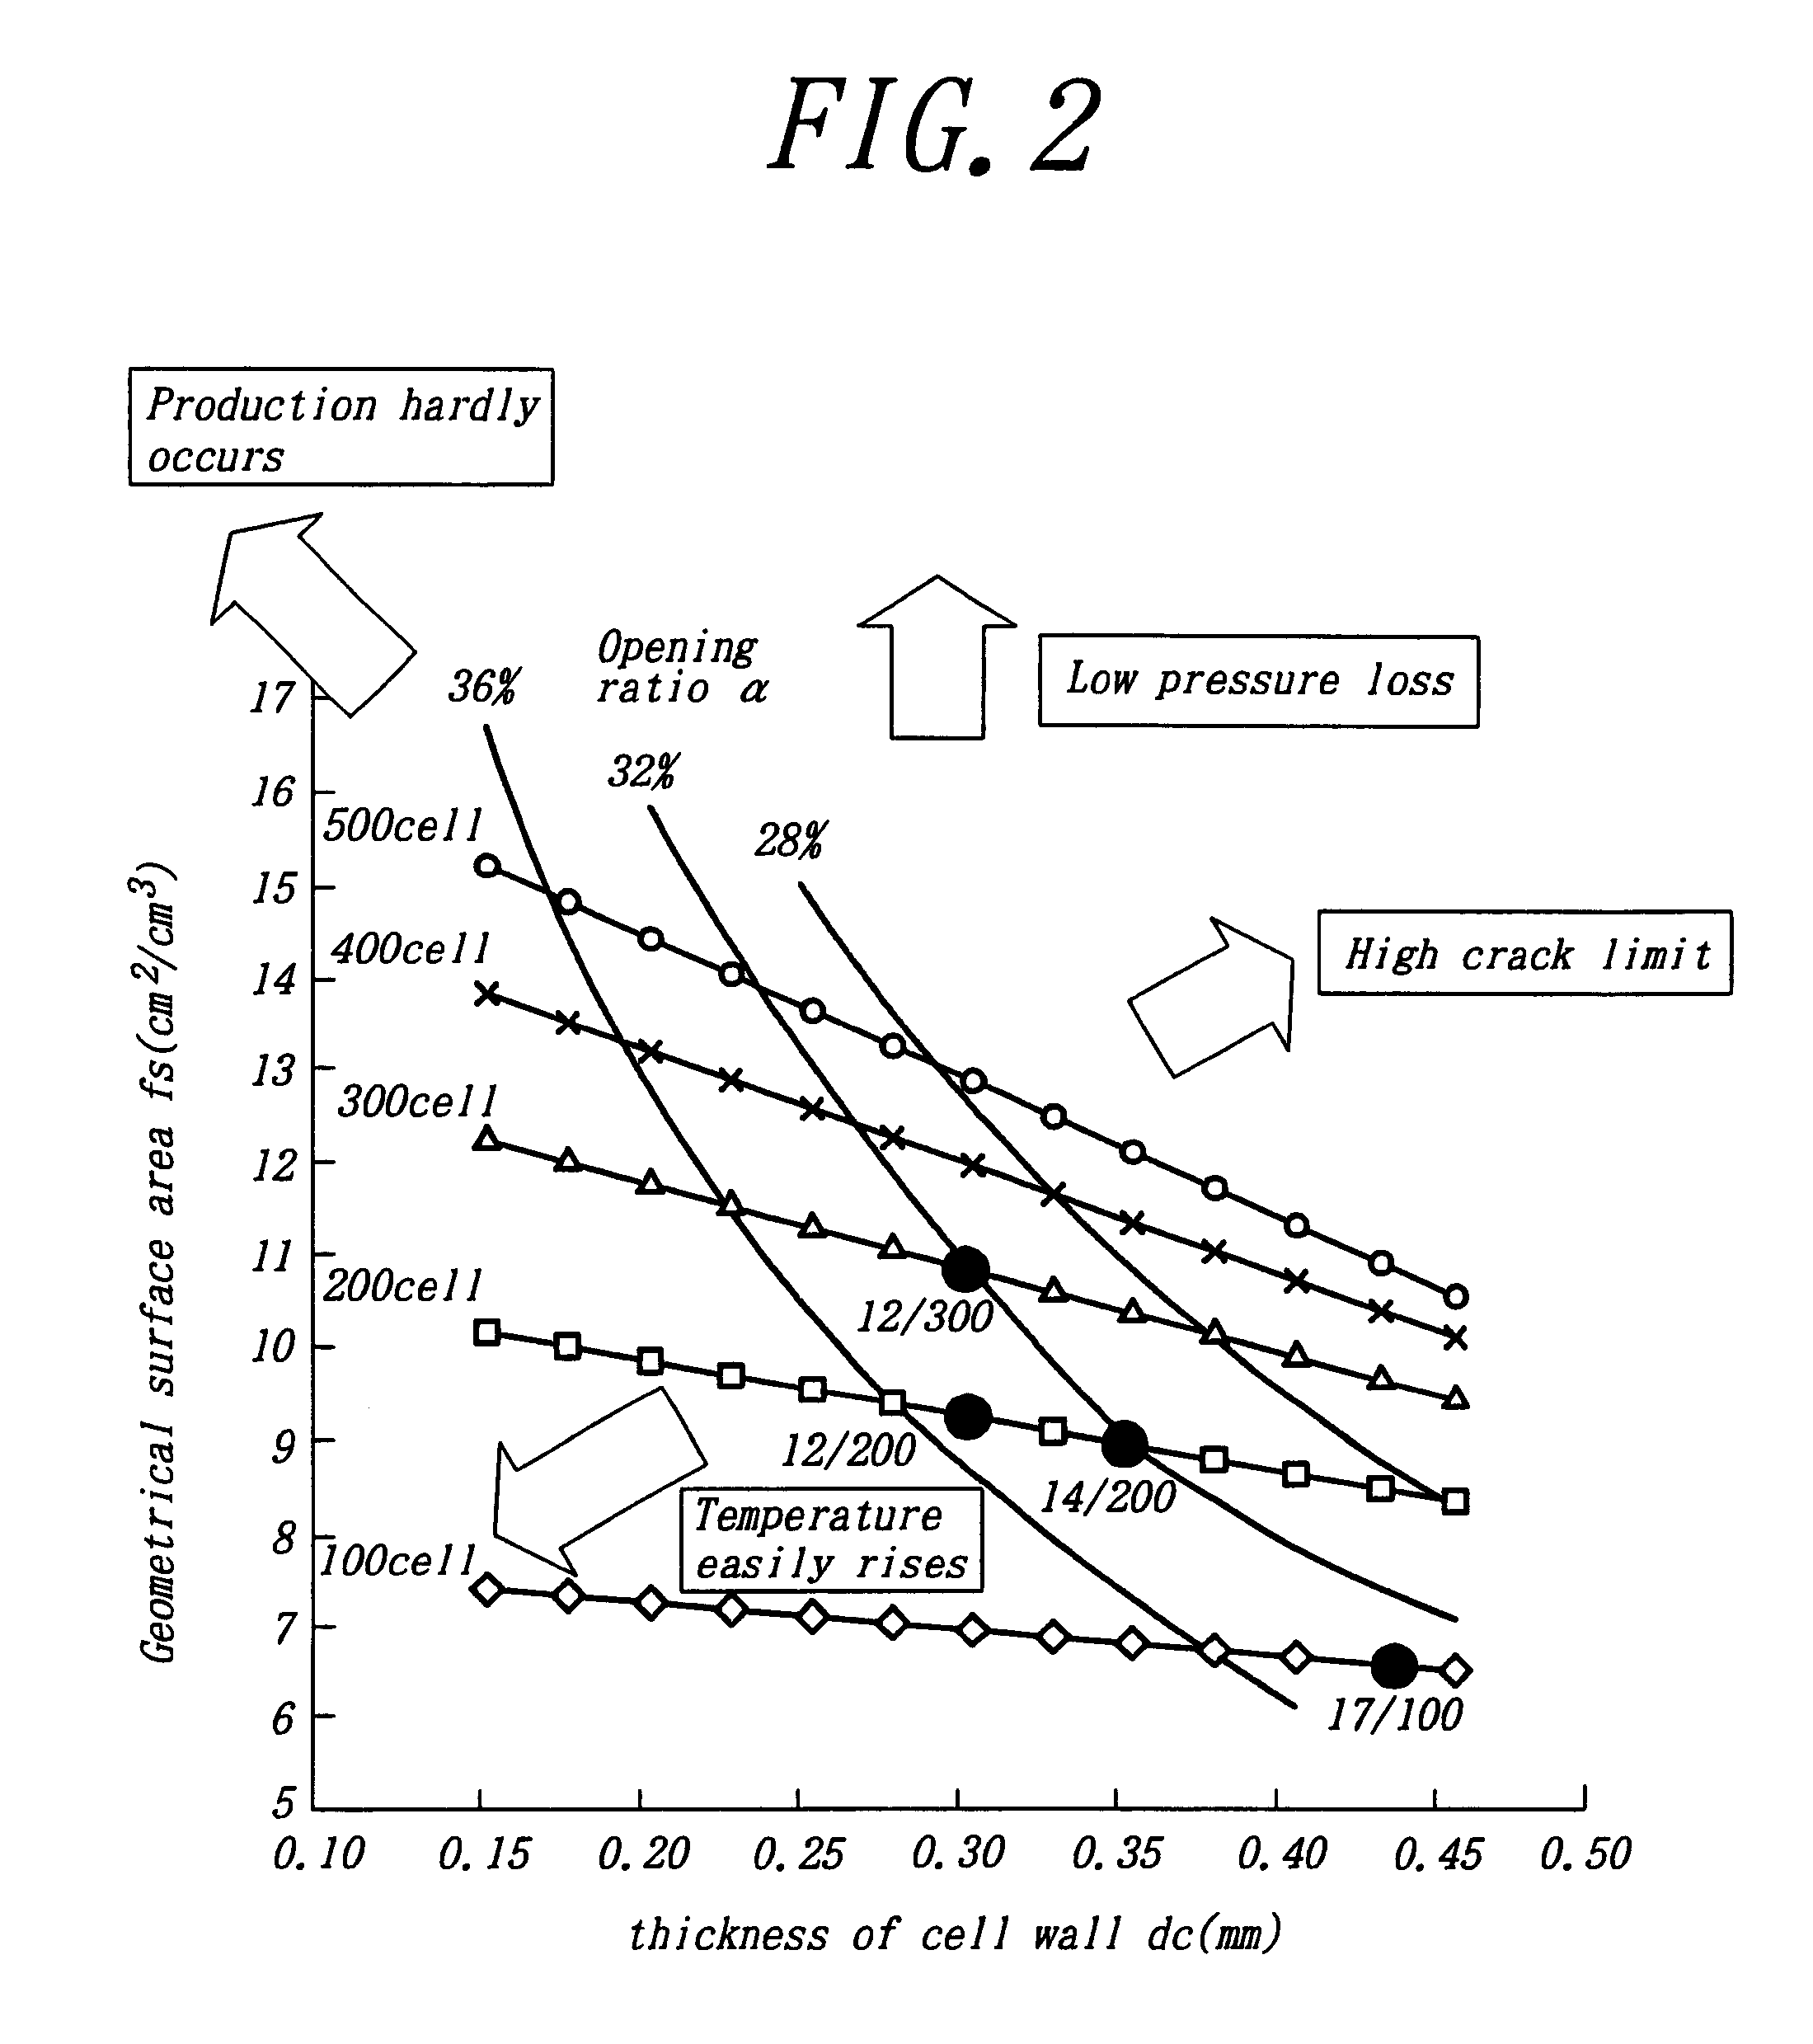 Regeneration system for an exhaust gas cleaning device